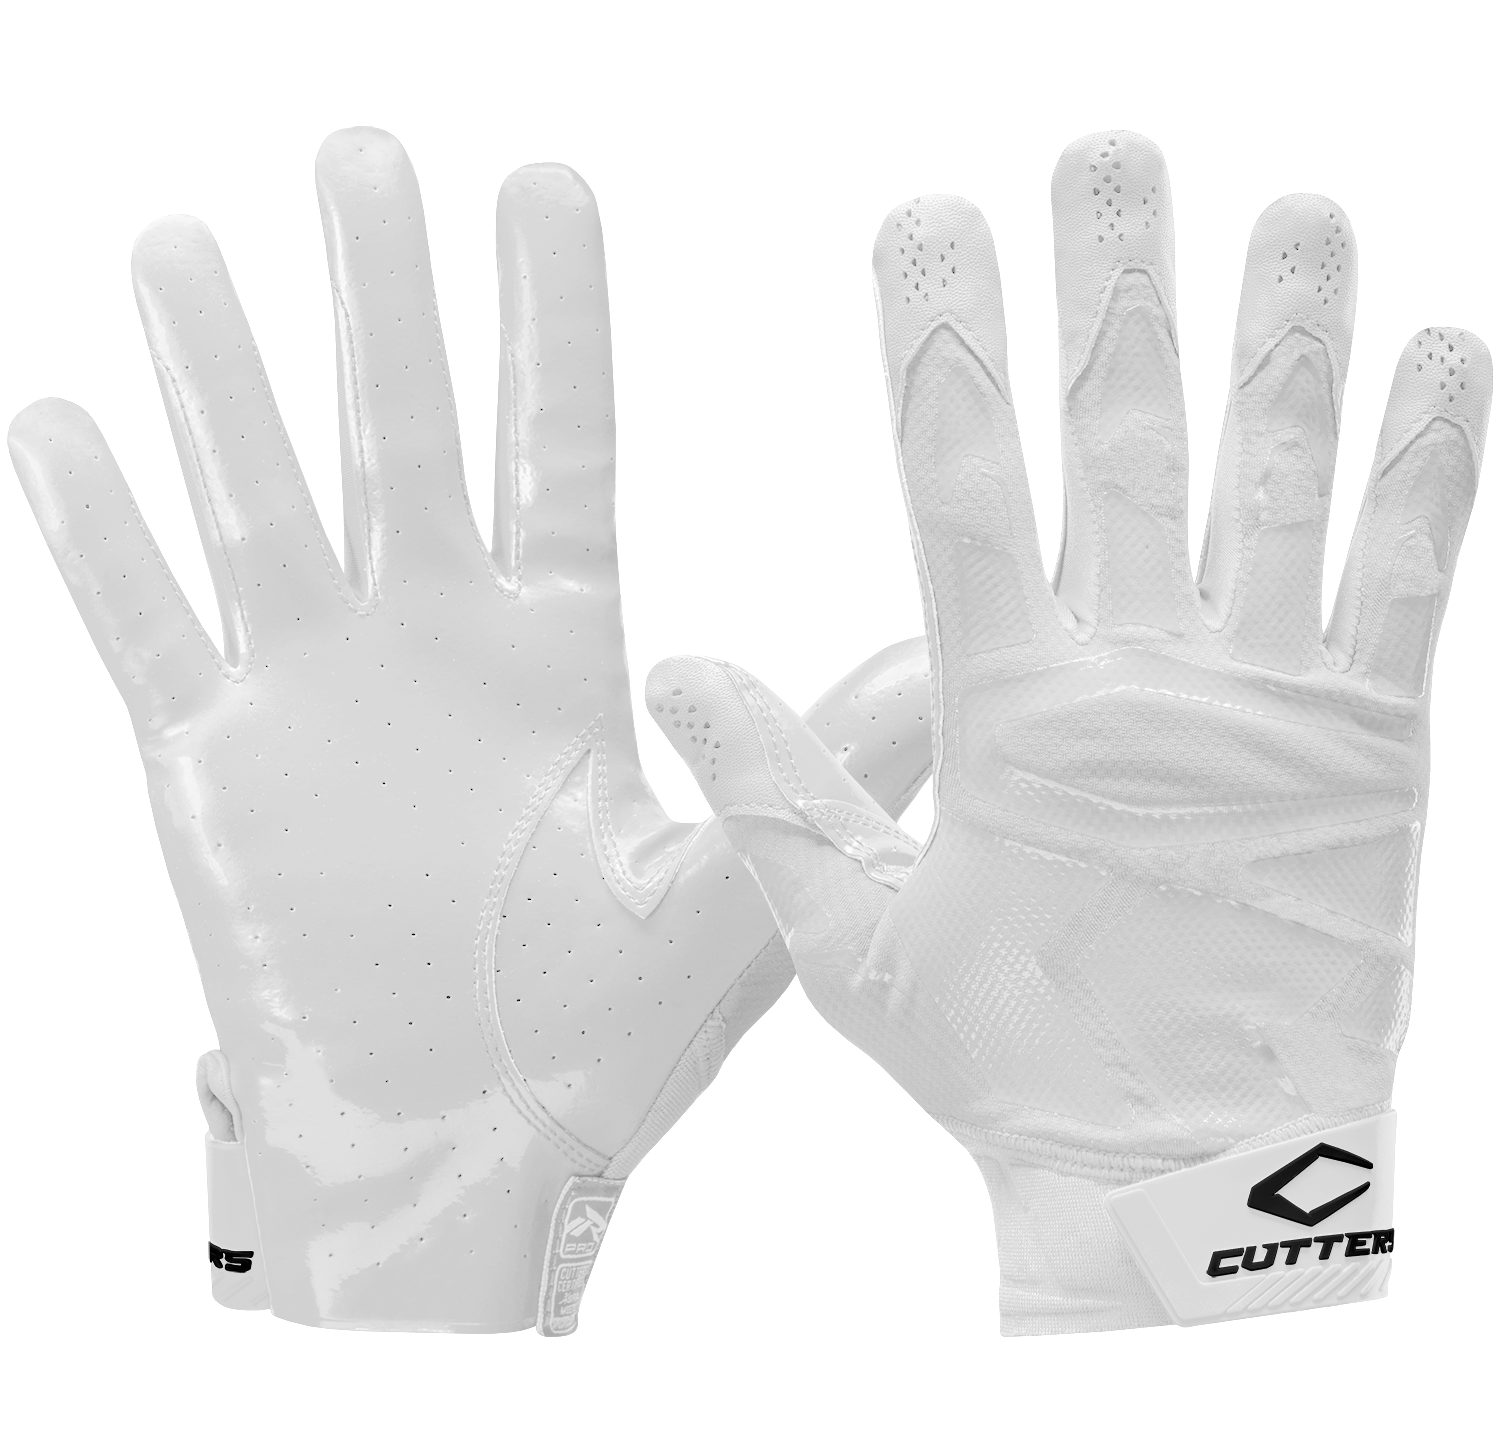 Pair Cutters Gloves Youth Rev Pro Receiver Glove